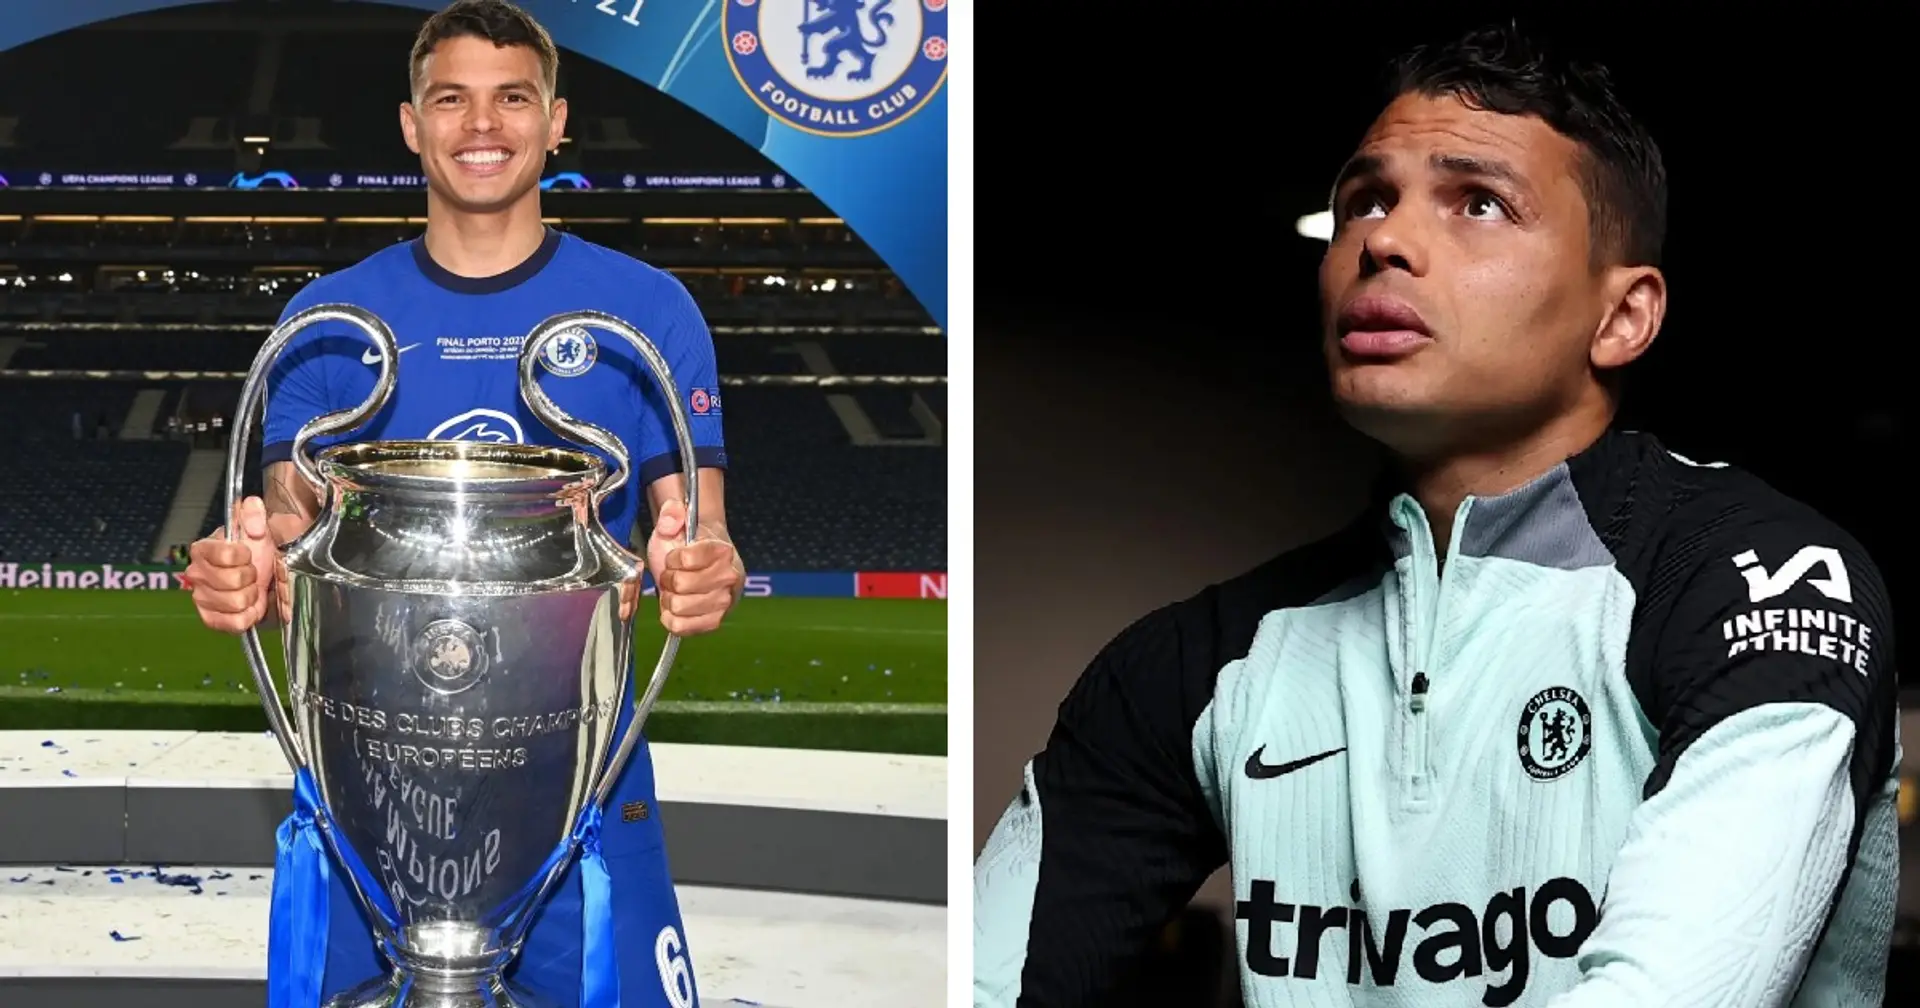 'A true legend of the sport and the club': Chelsea fans react to Thiago Silva's departure announcement